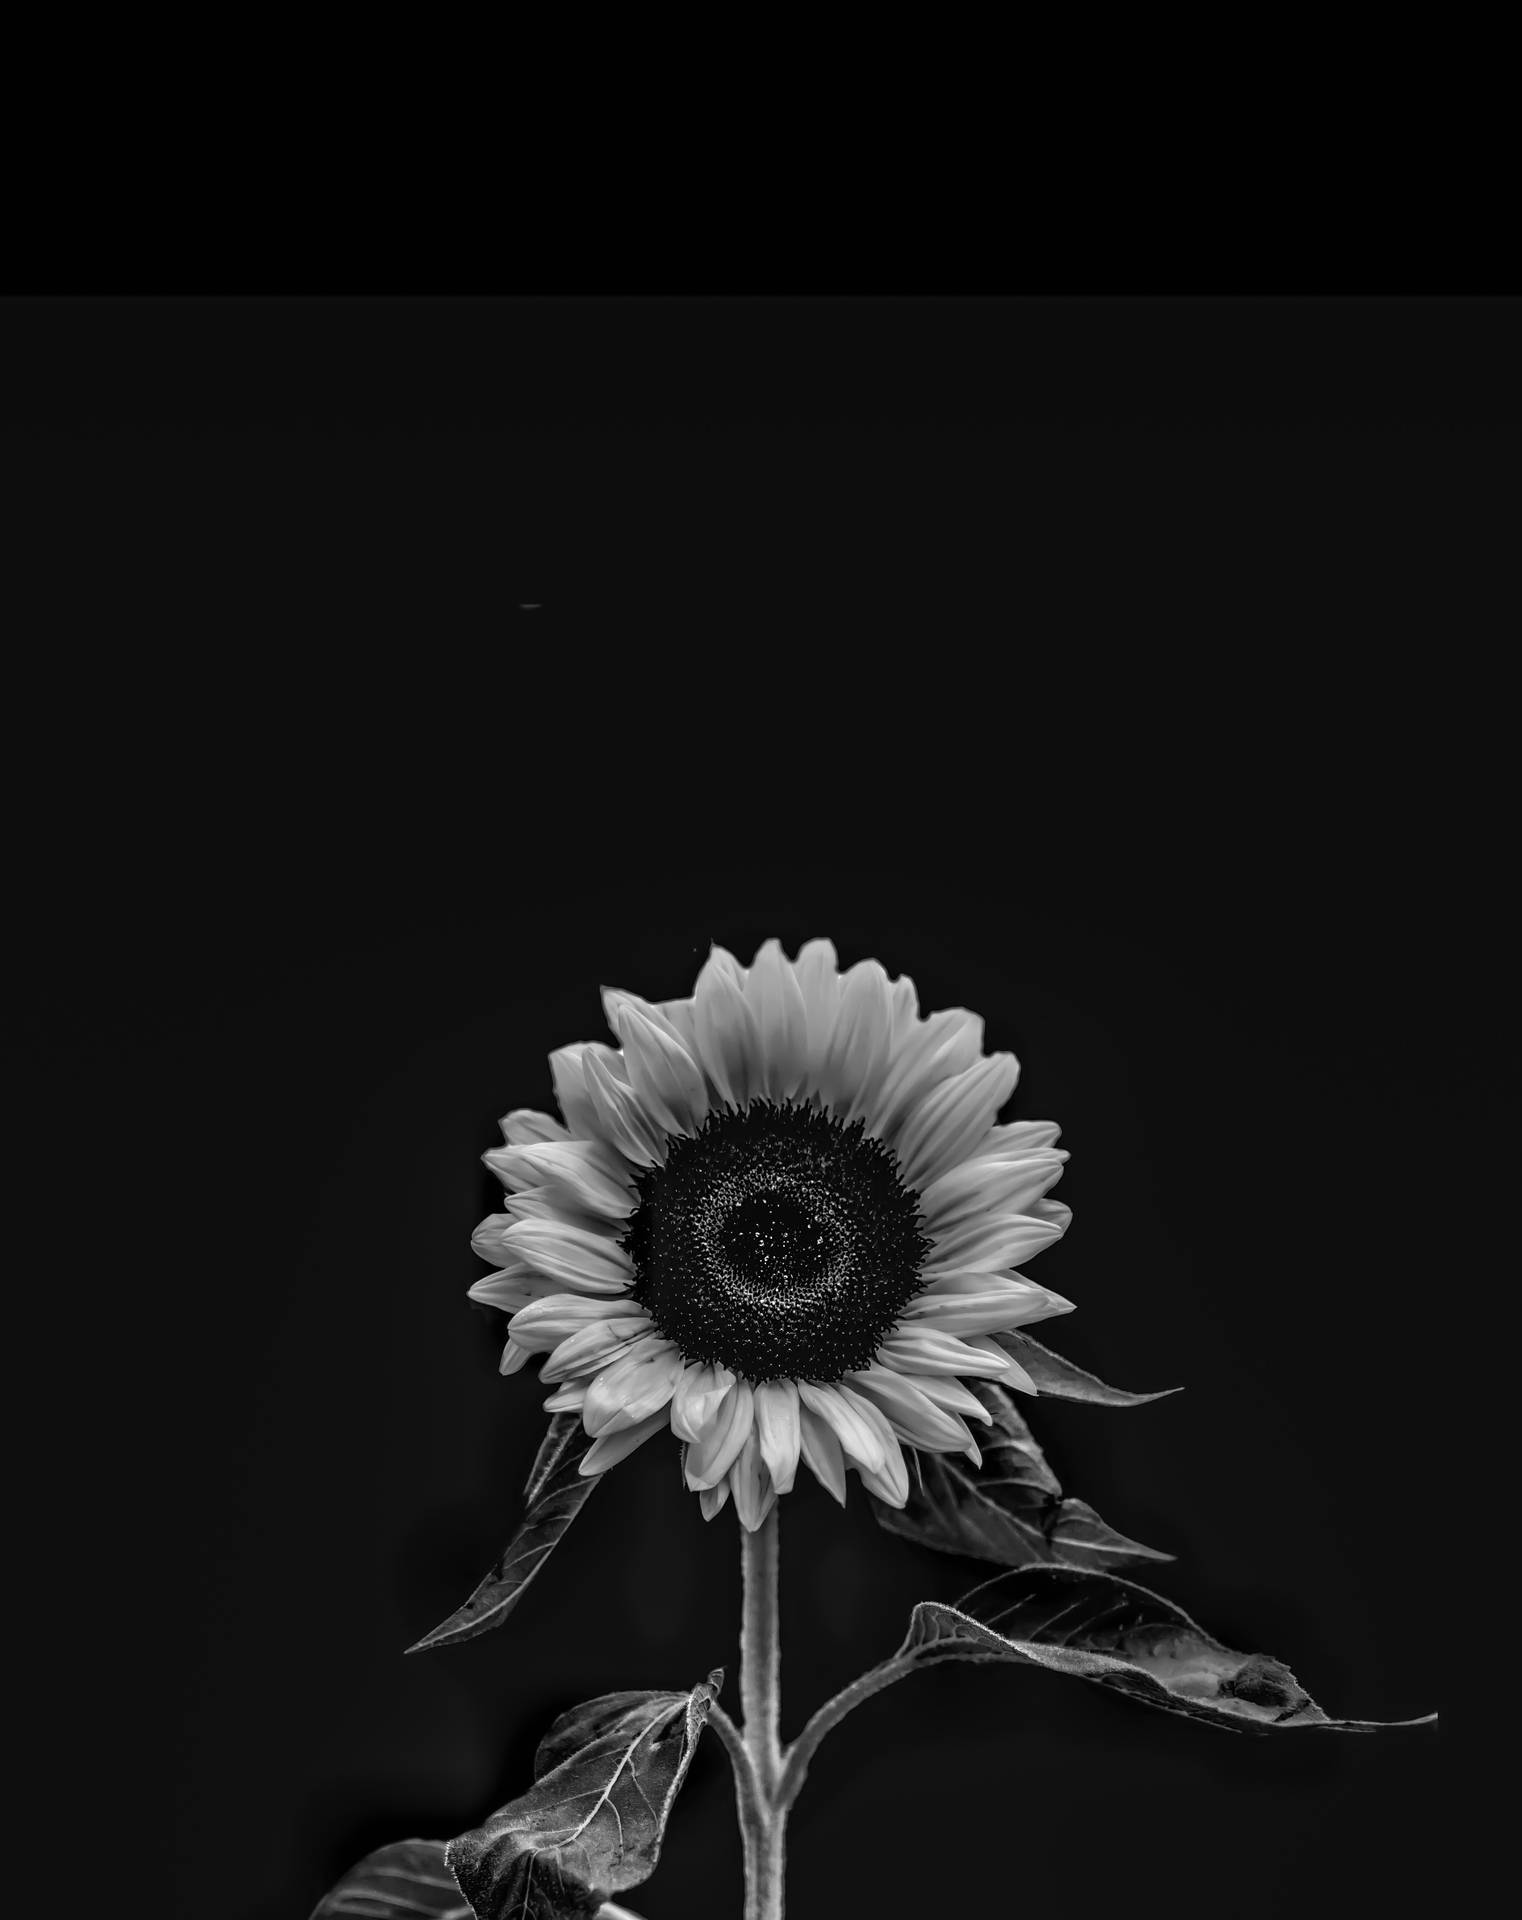 Remarkable 4k Iphone Wallpaper Featuring A Black And White Sunflower Background